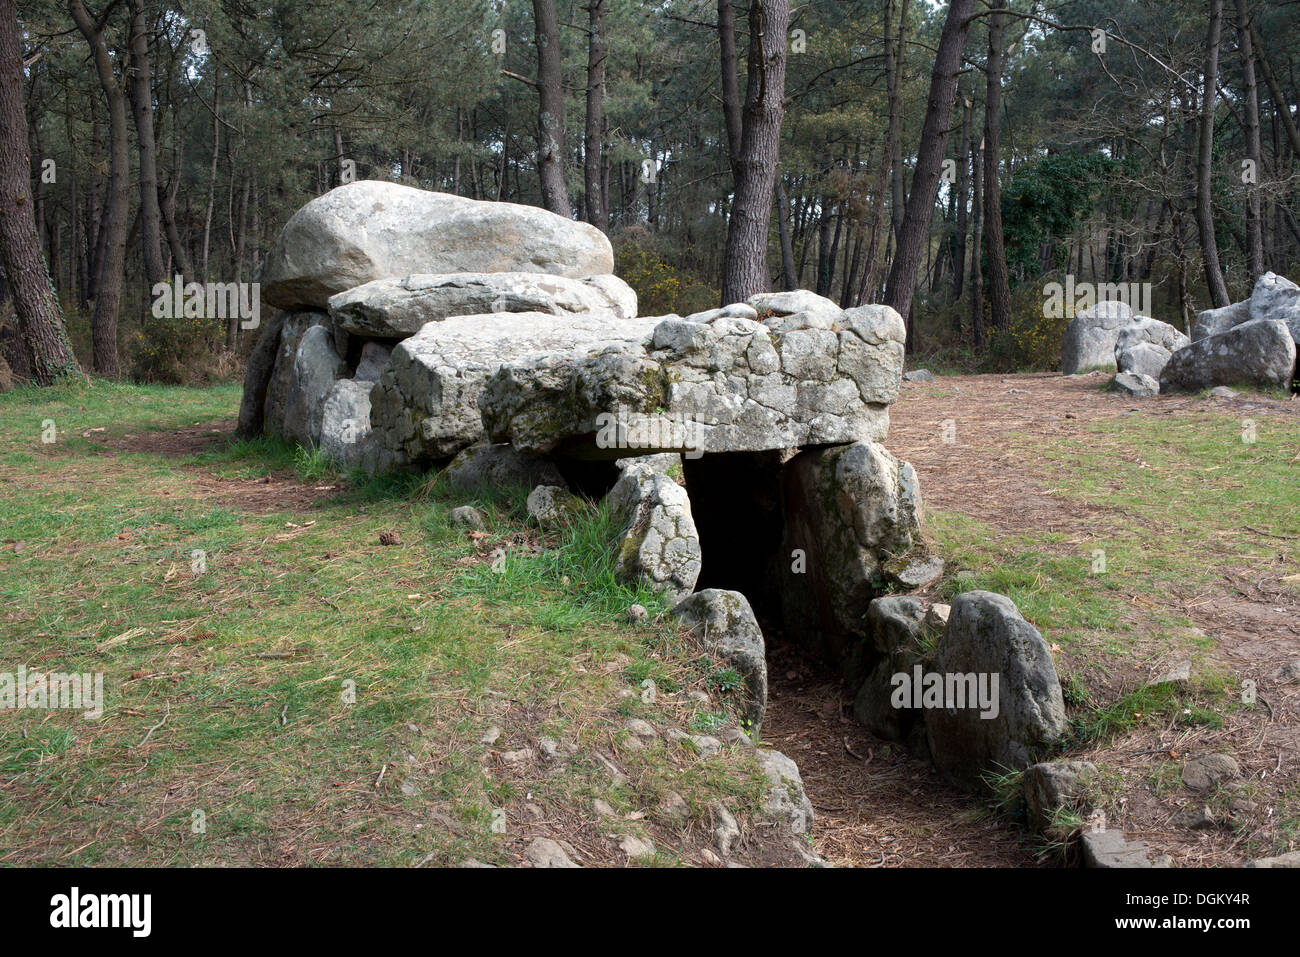 Dolmen, portal tomb, portal grave, in a wooded area in Mané-Kerioned, Carnac, Département Morbihan, Brittany, France, Europe Stock Photo